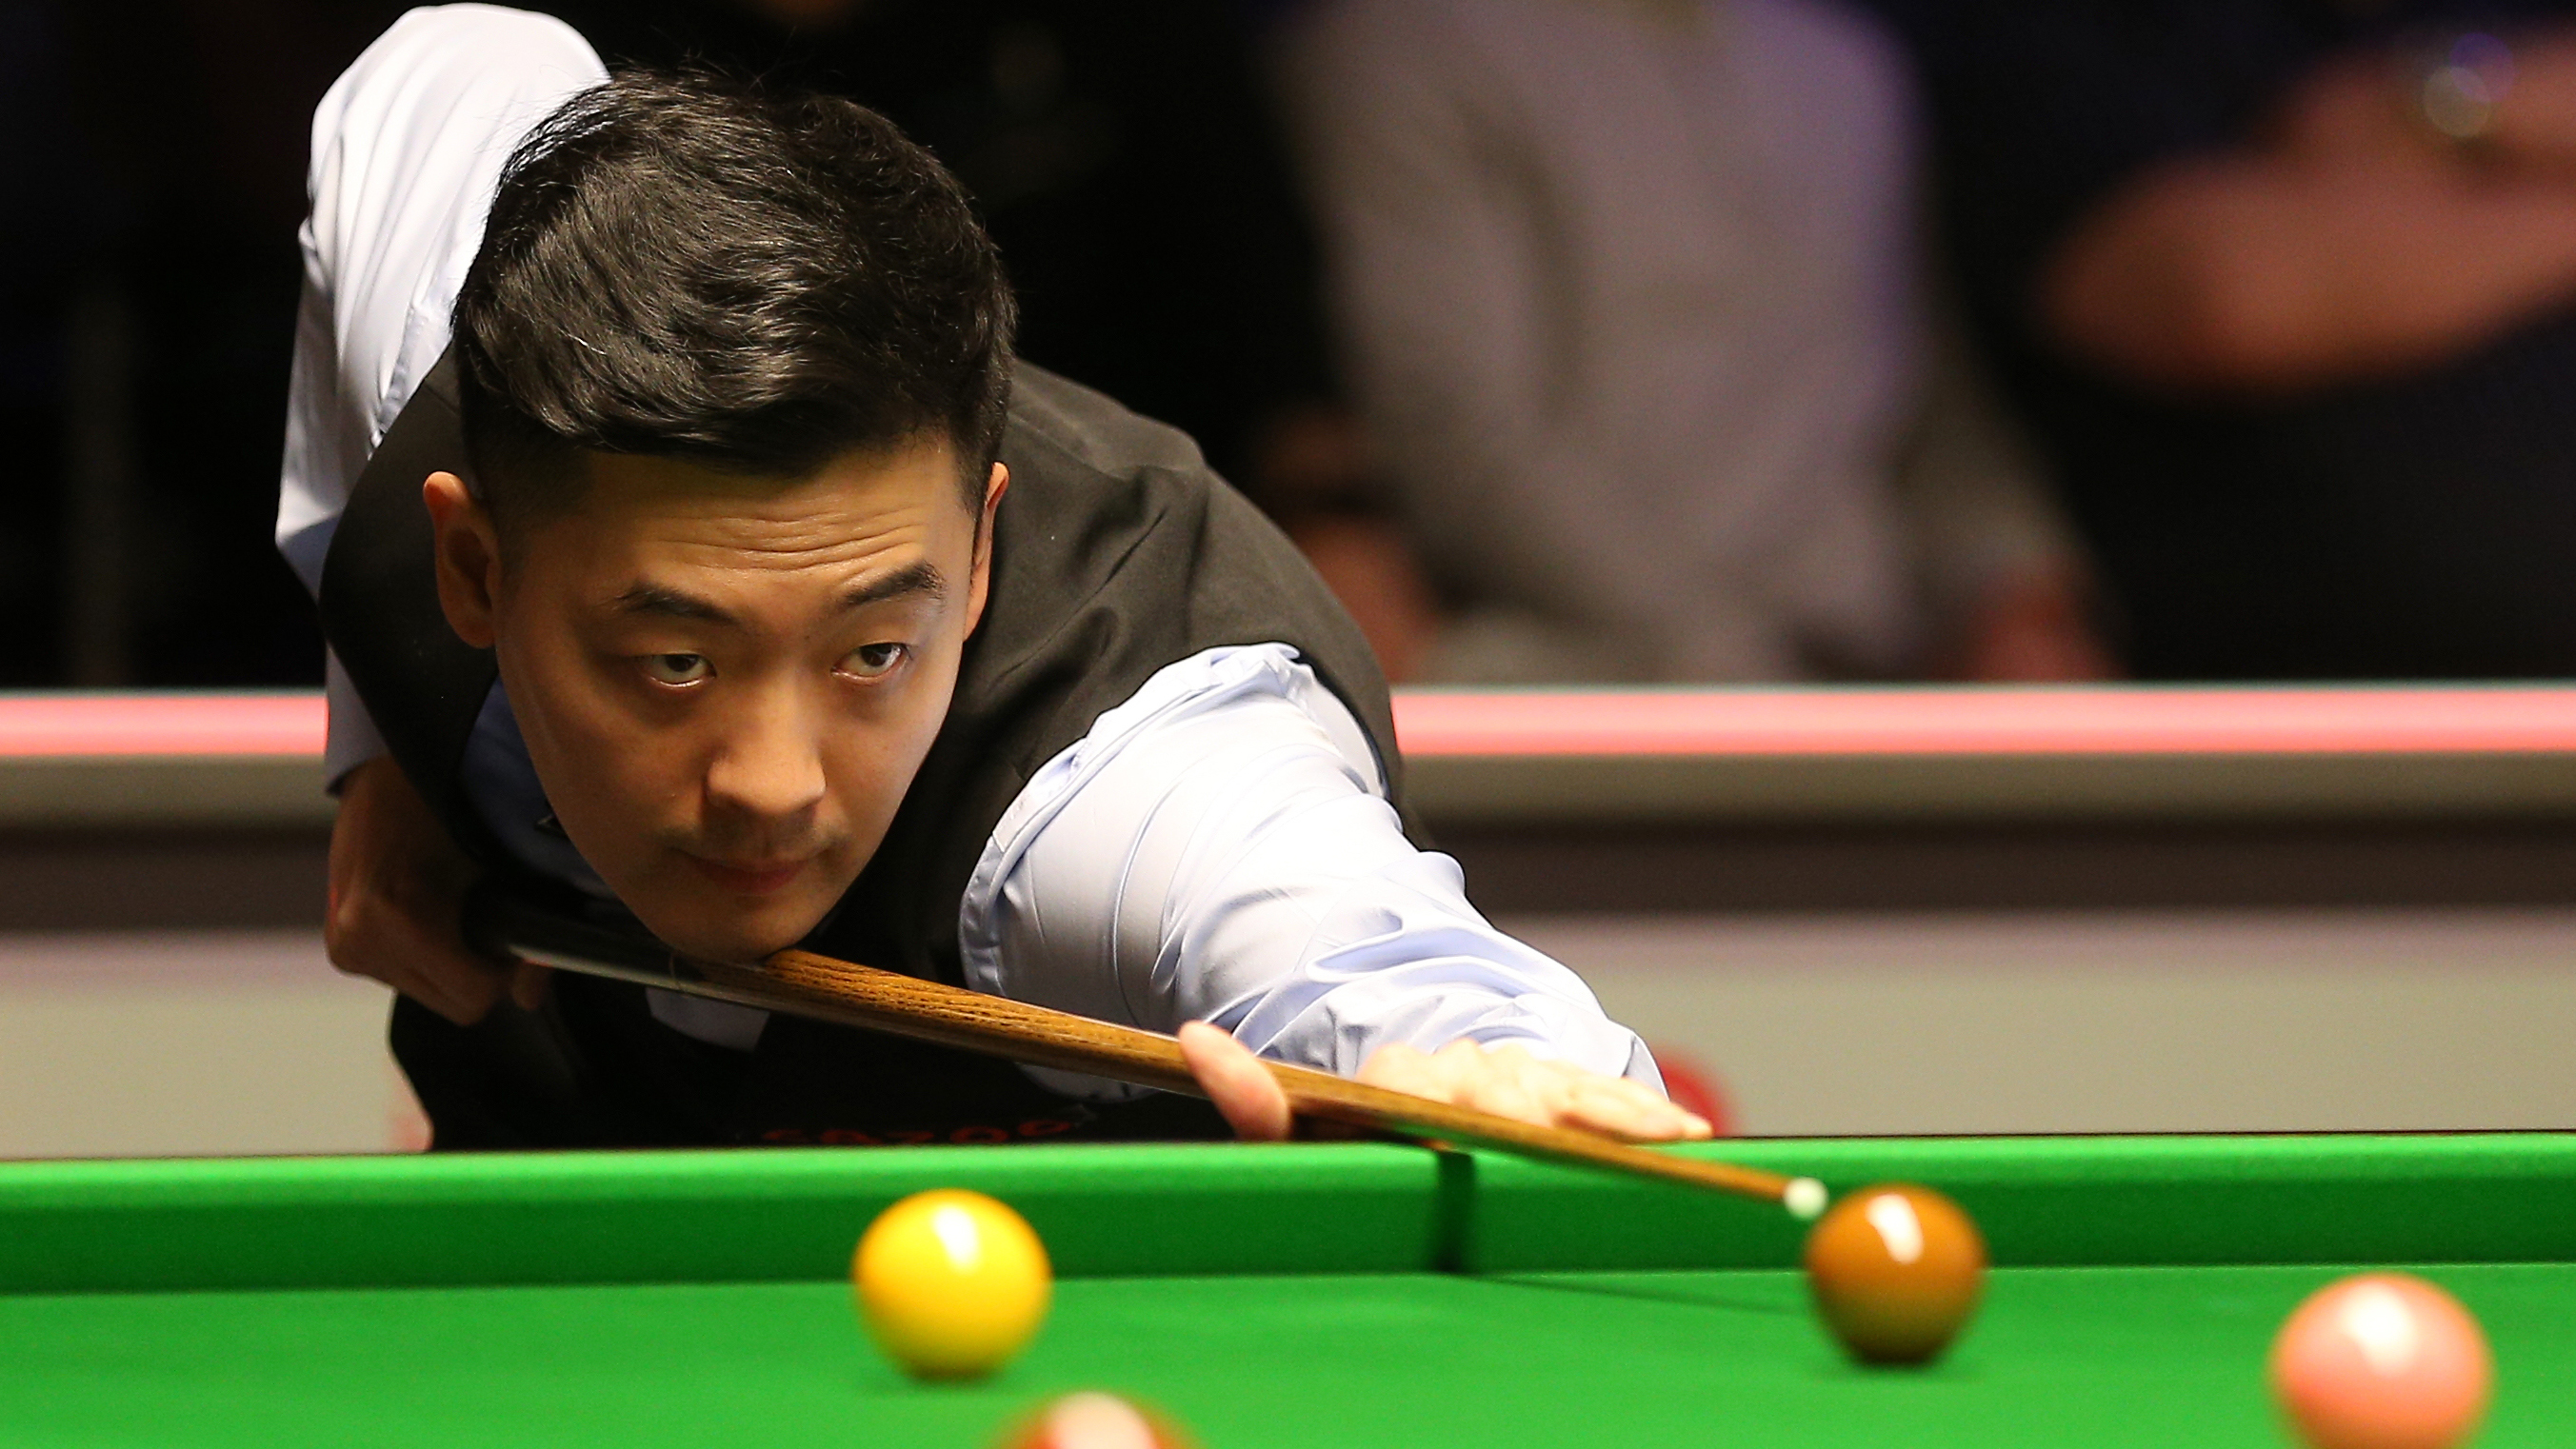 Snooker betting tips and analysis Three World Championship qualifiers to watch